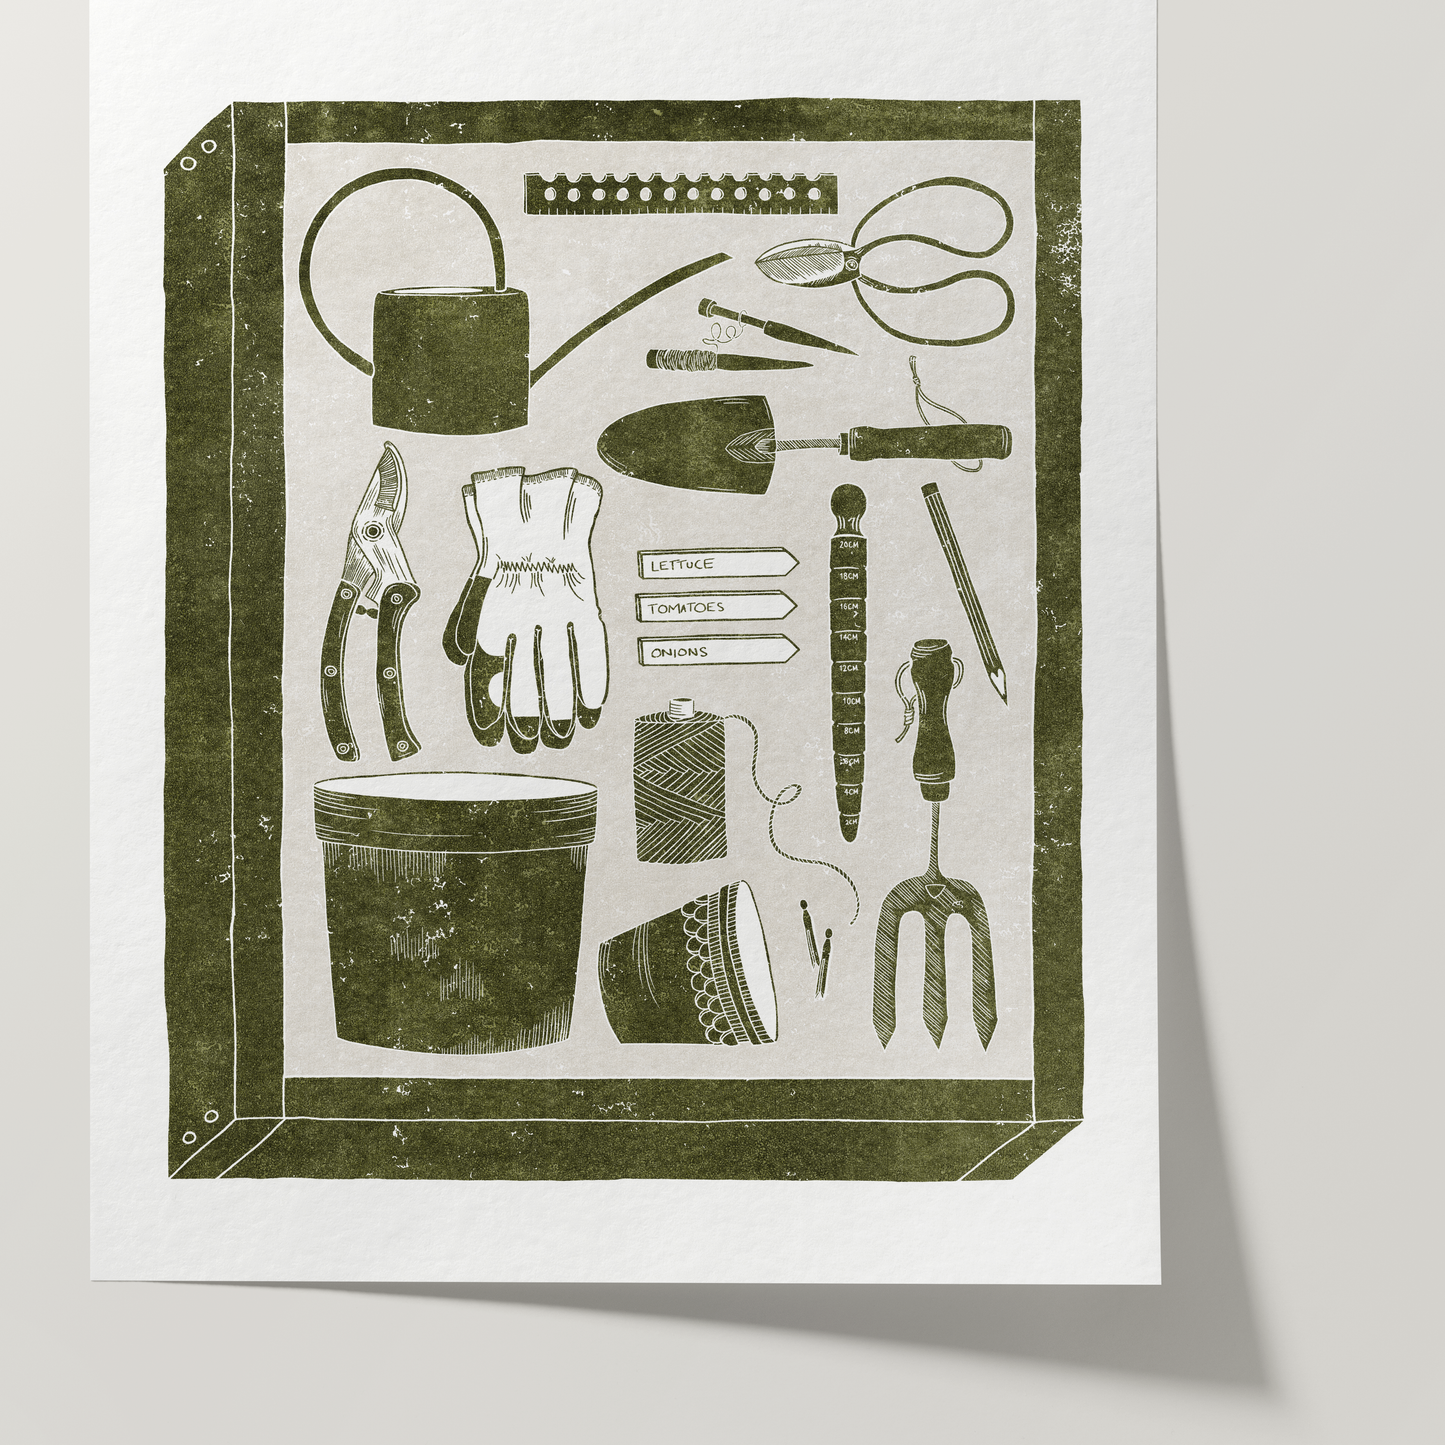 Home Decor Print - Nature-inspired Prints - Garden Tools - Linocut Effect Illustration - Green - Hahnemühle German Etching Paper